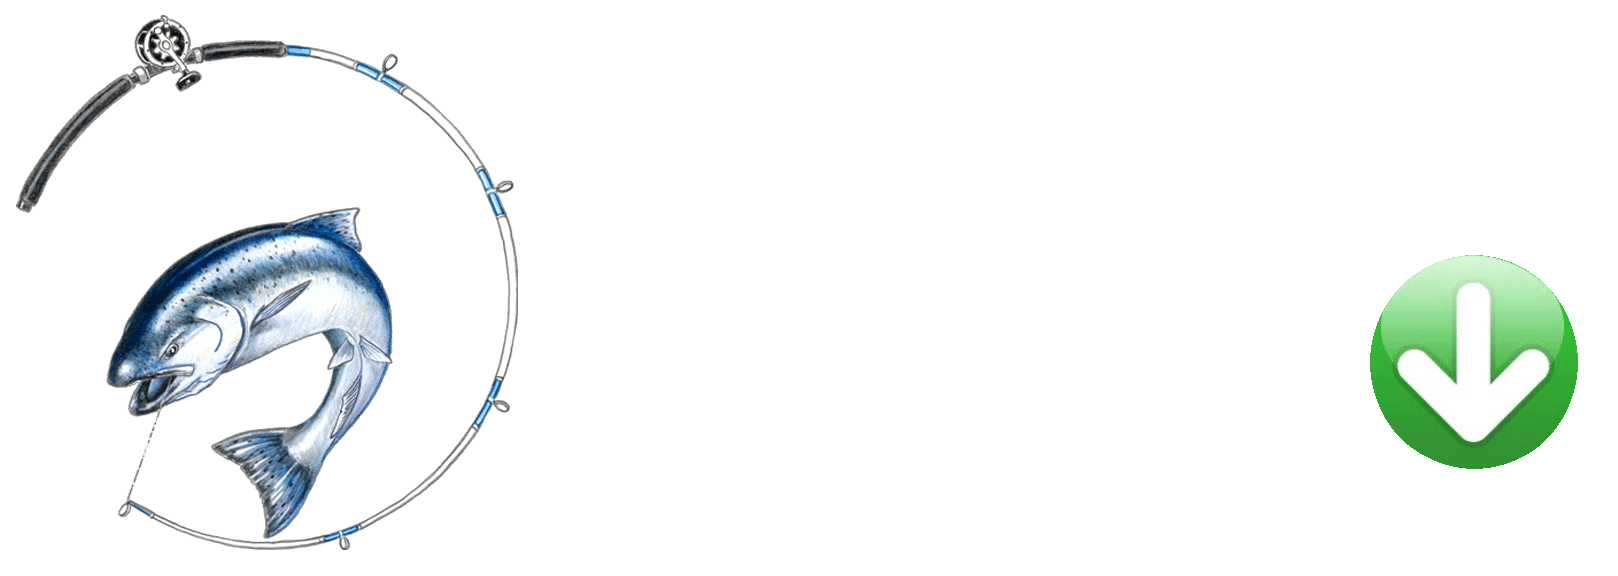 logo with phone number